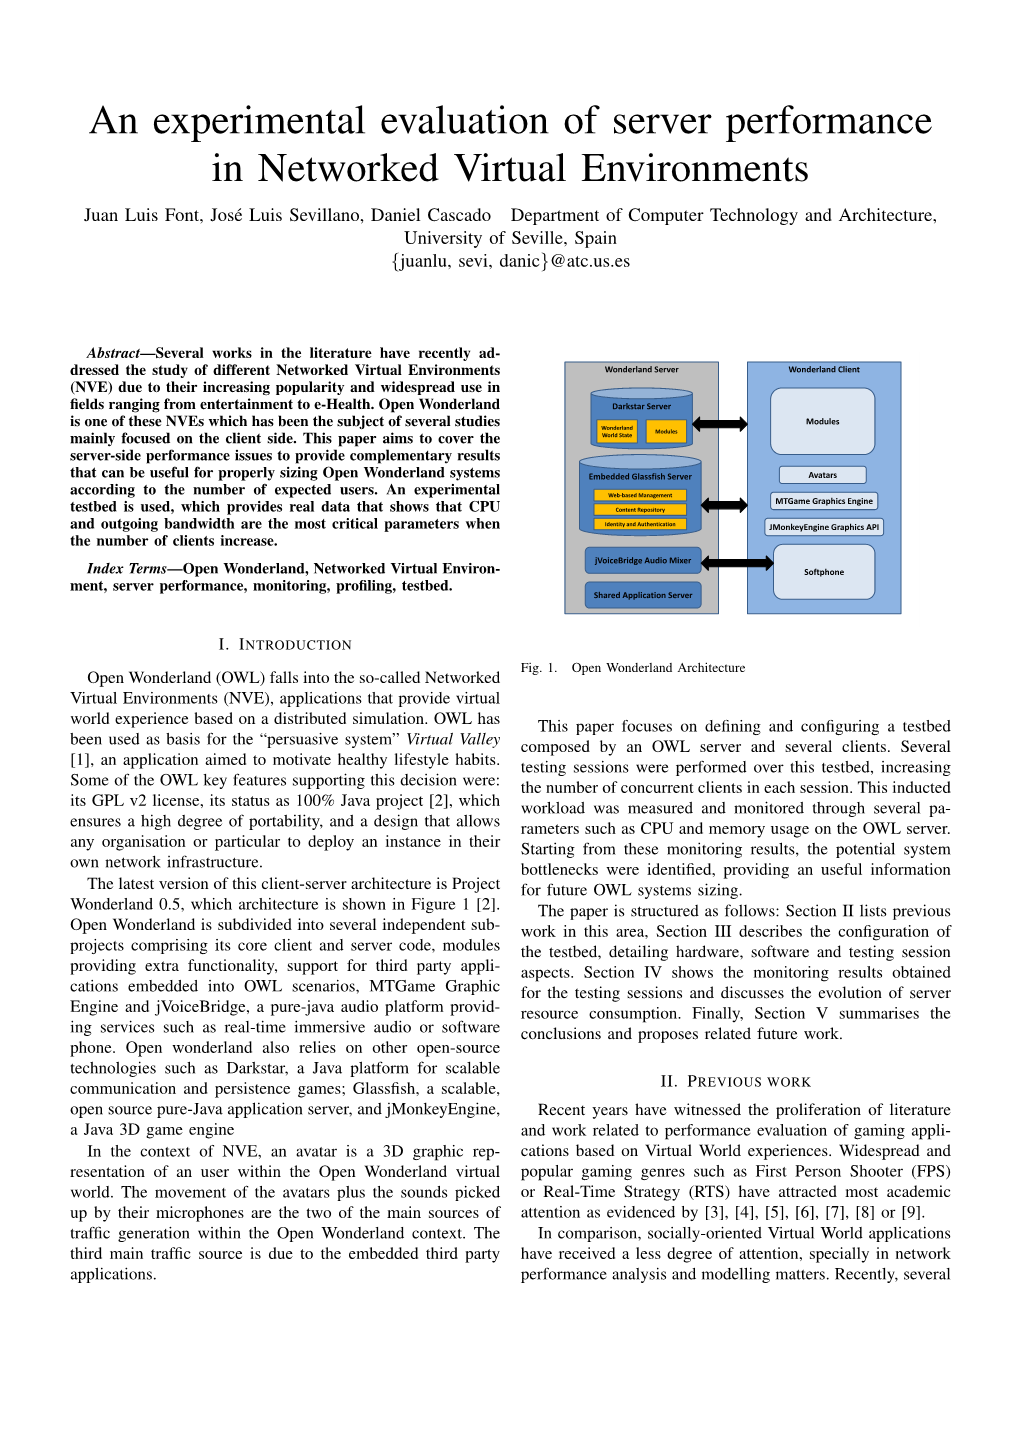 An Experimental Evaluation of Server Performance in Networked Virtual Environments